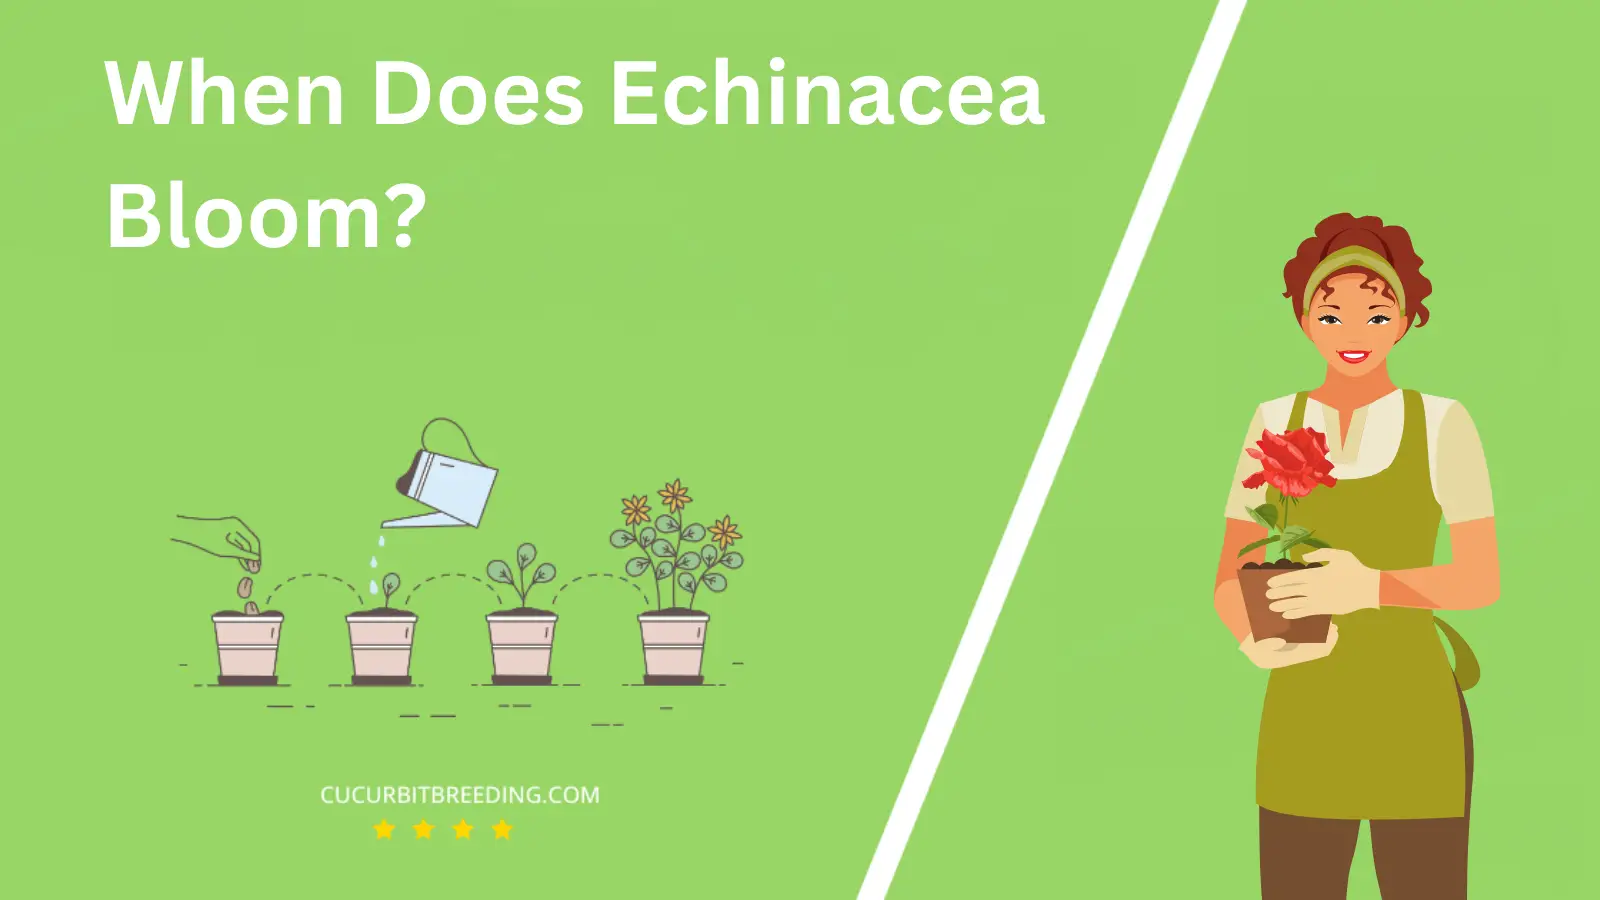 When Does Echinacea Bloom?